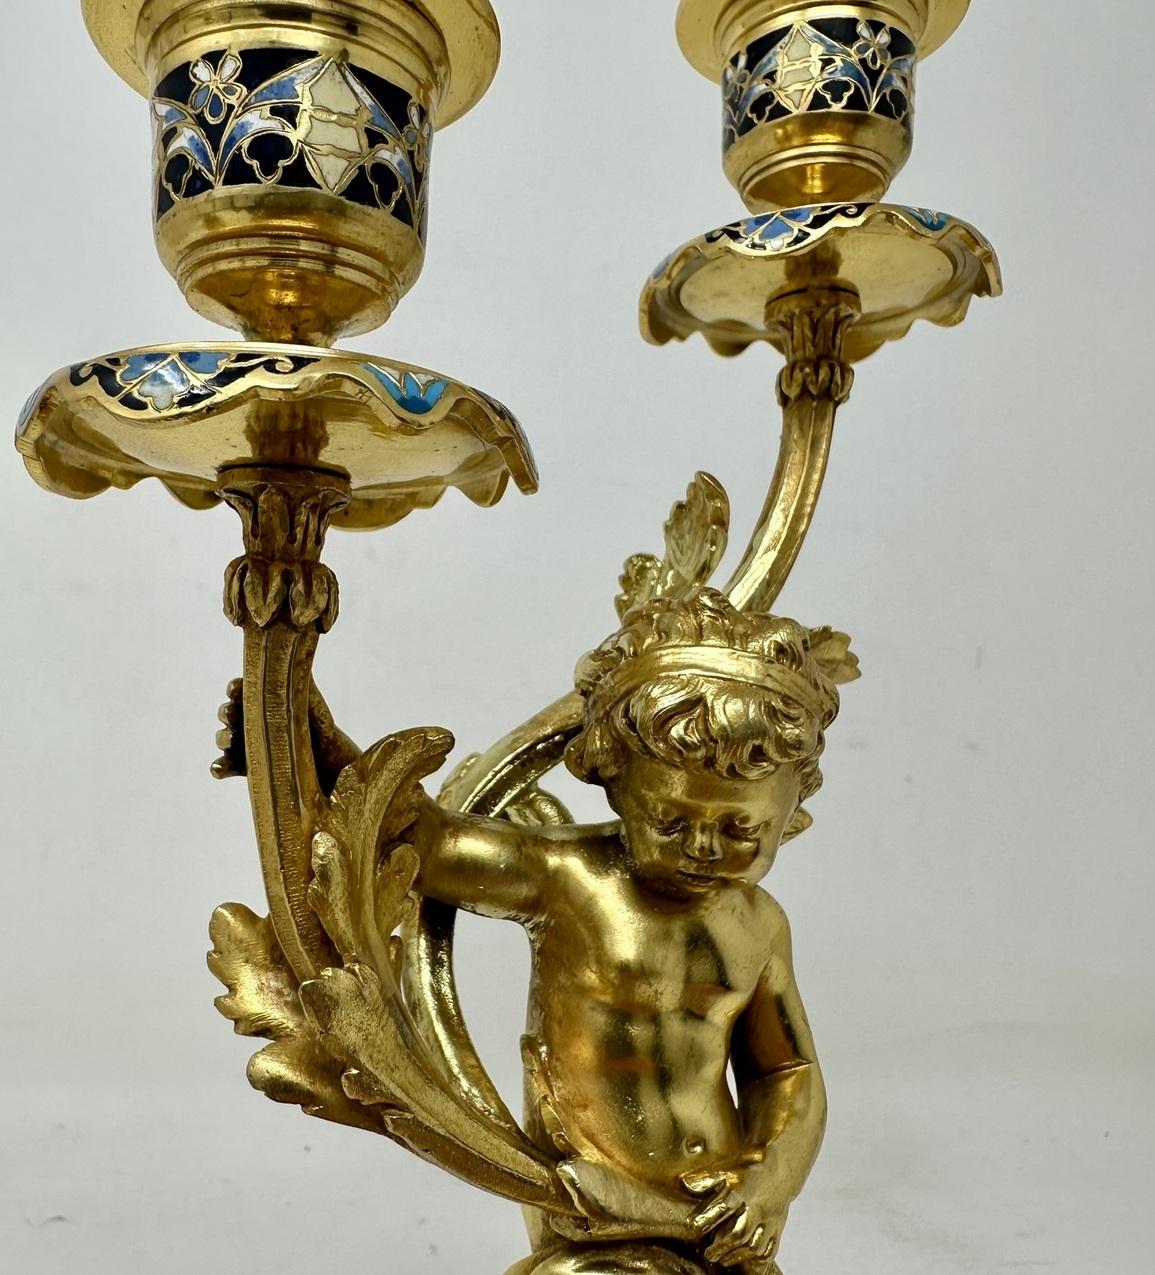 An Exceptionally Stylish Pair of French Bronze Dore and Champleve Cloisonne twin arm Cherub or Putti Candelabra of outstanding quality and generous proportions. Third quarter of the Nineteenth Century, possibly earlier. 

This magnificent pair are